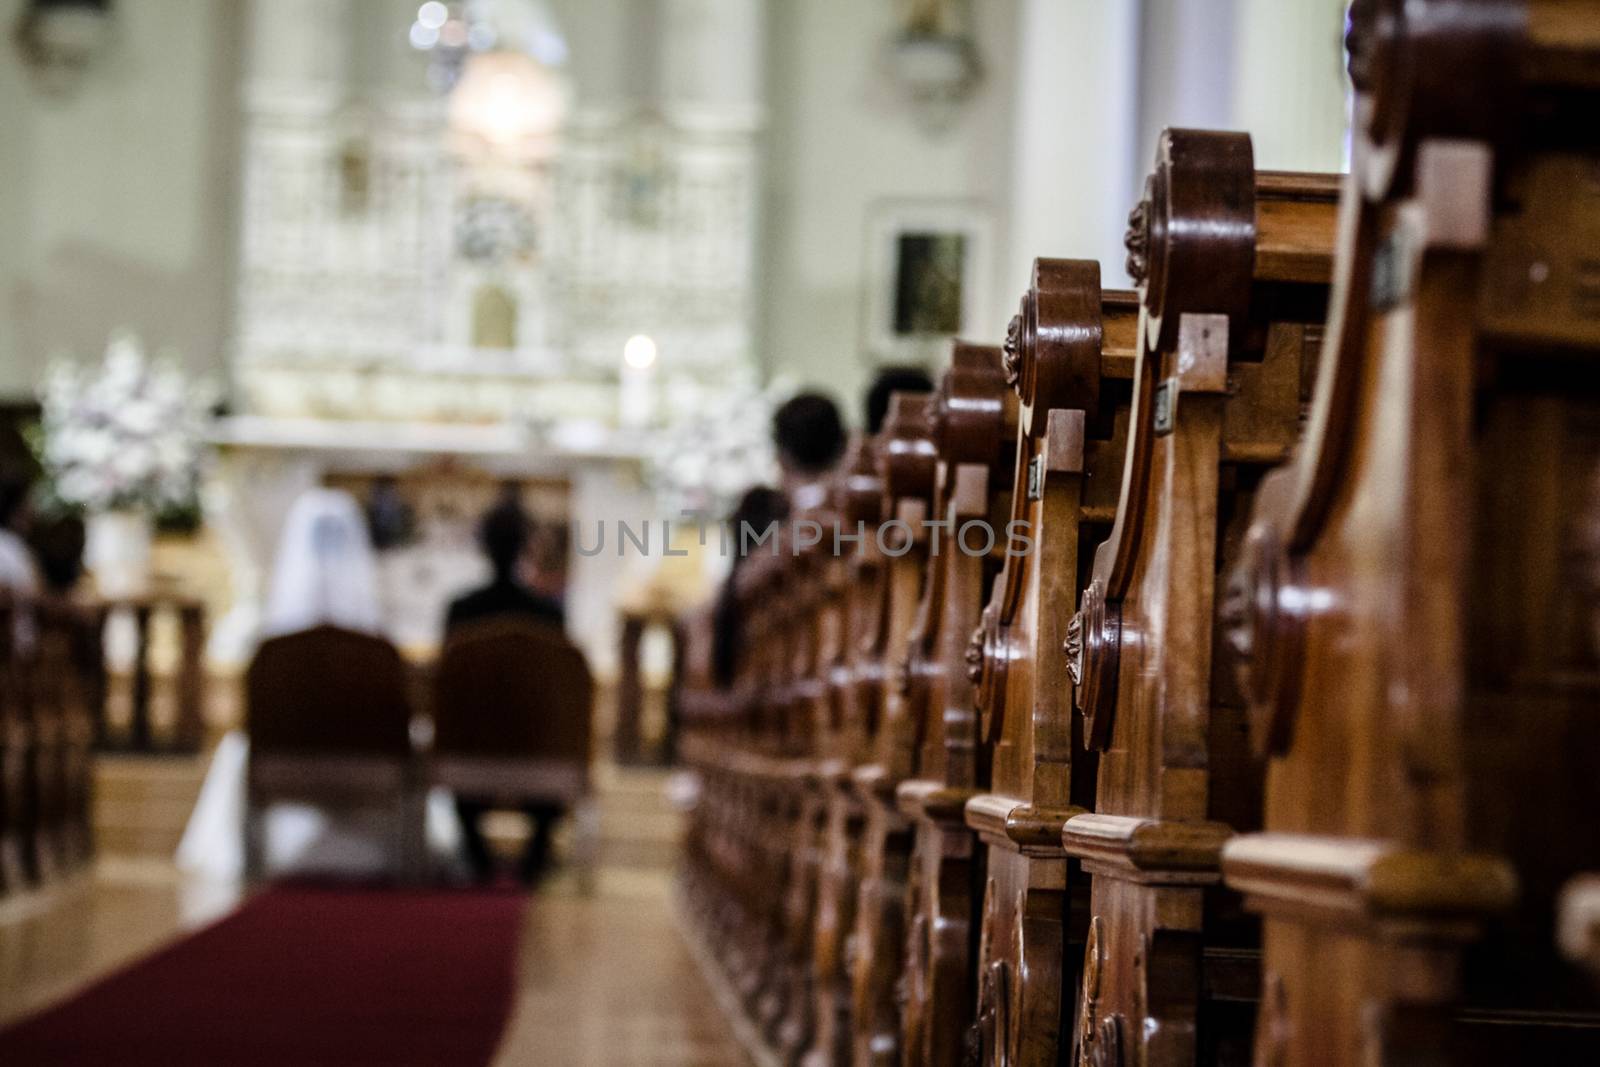 Wedding Ceremony inside a Church with Blurry Couple in Background